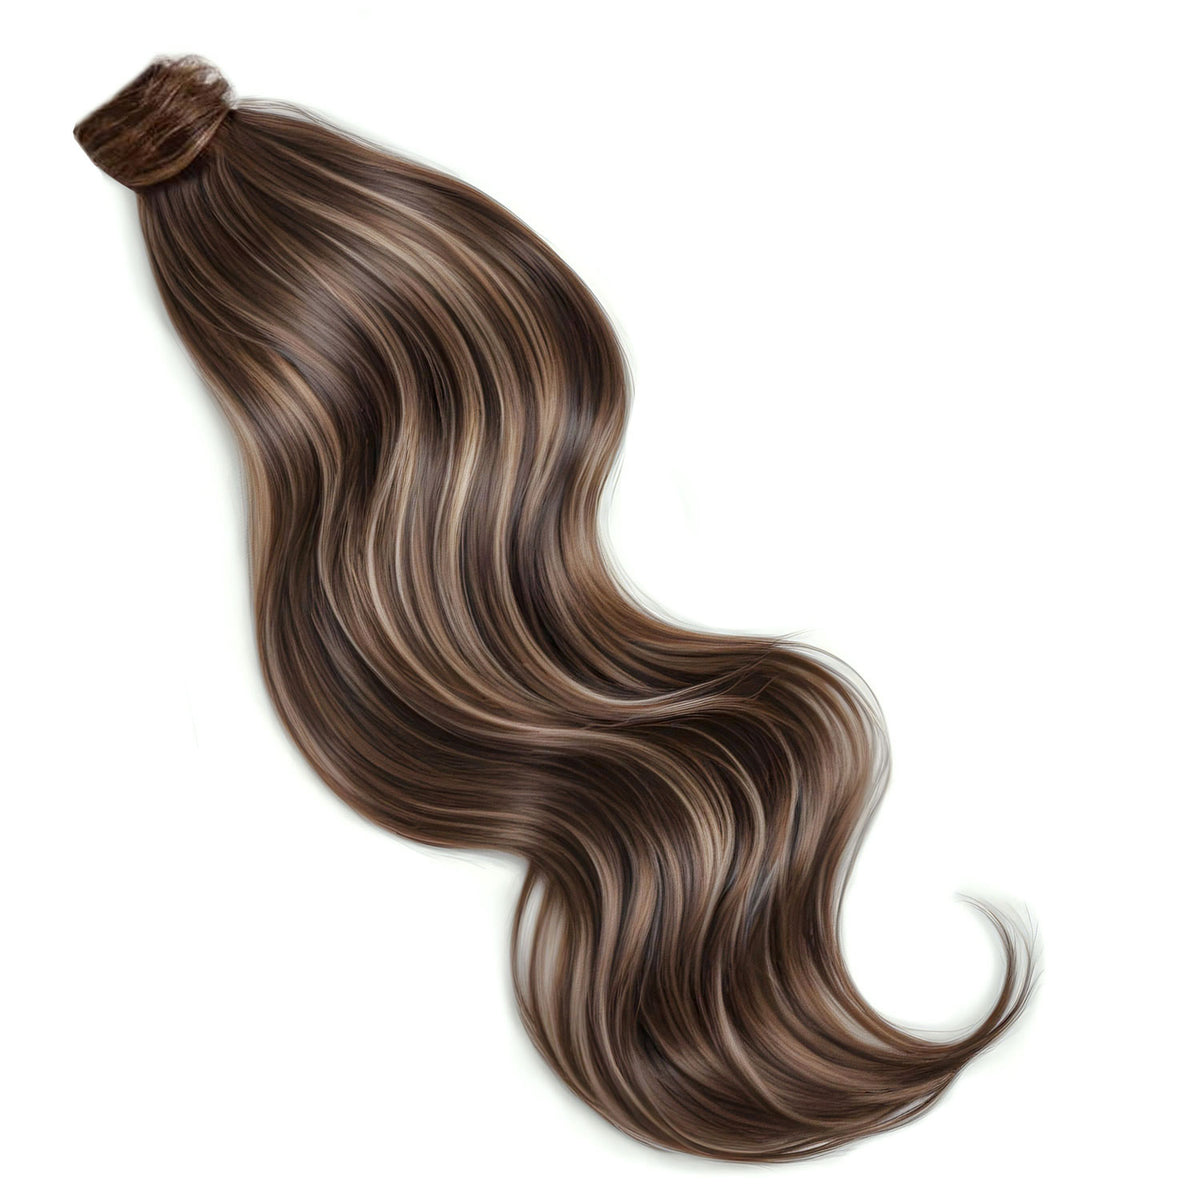 Ponytail Hair Extensions USA